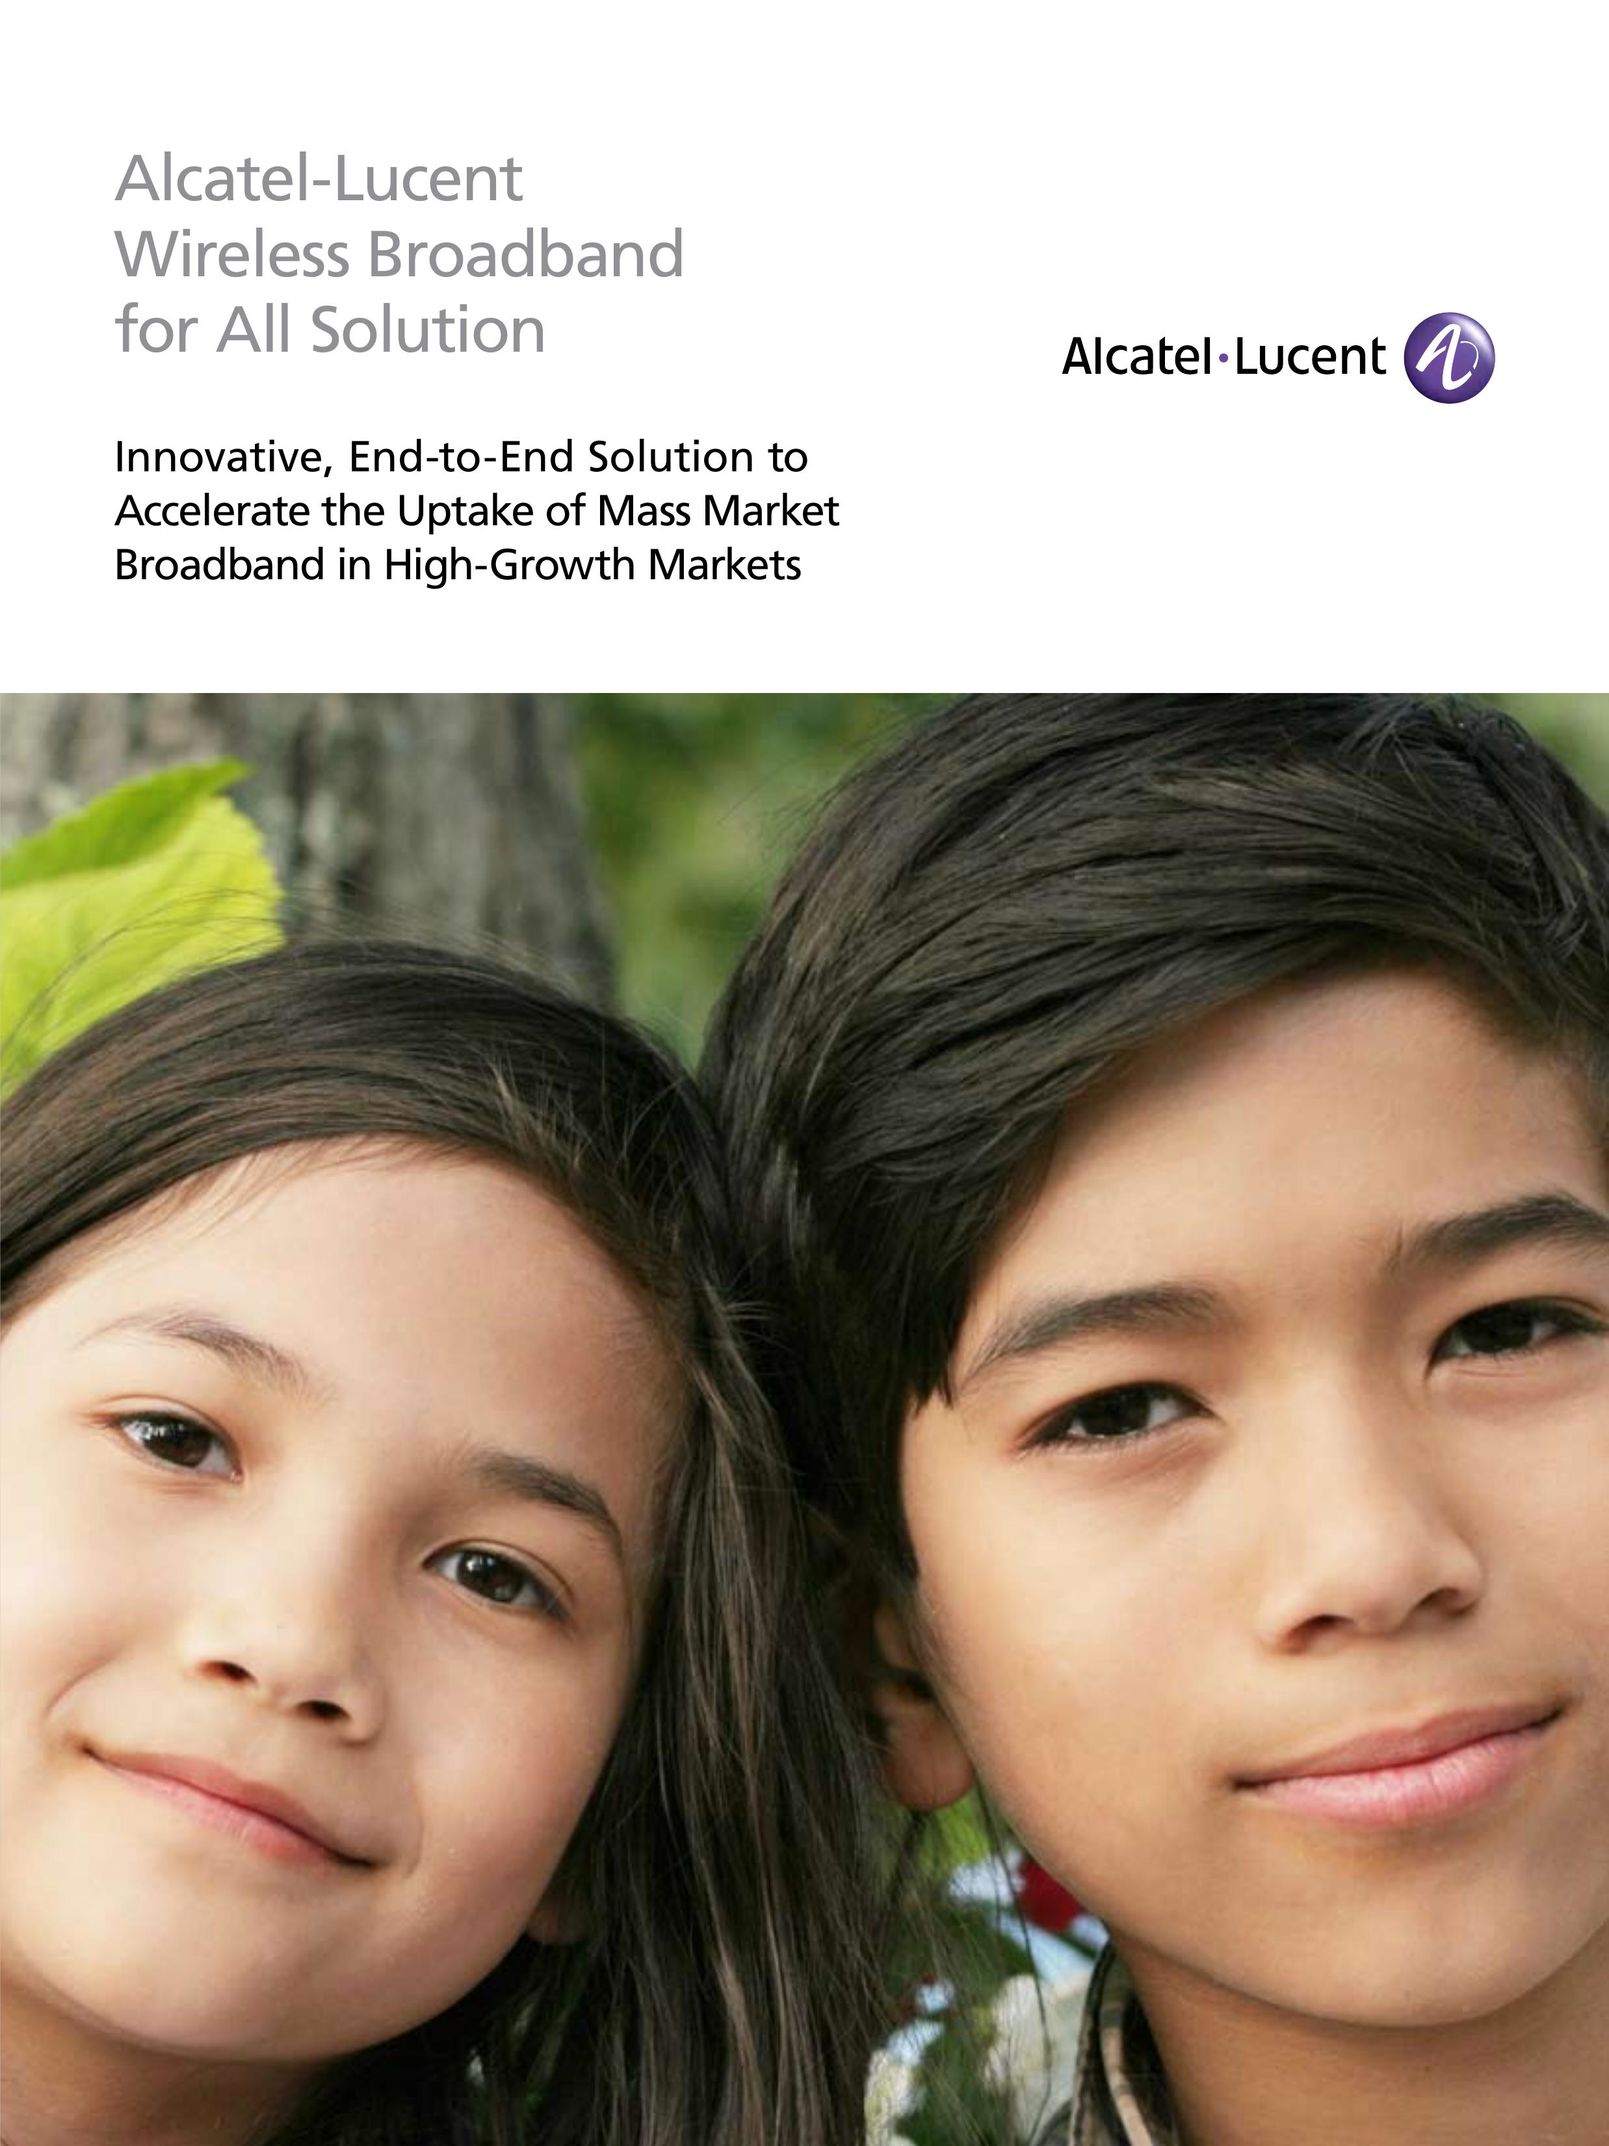 Alcatel-Lucent Wireless Broadband Network Router User Manual